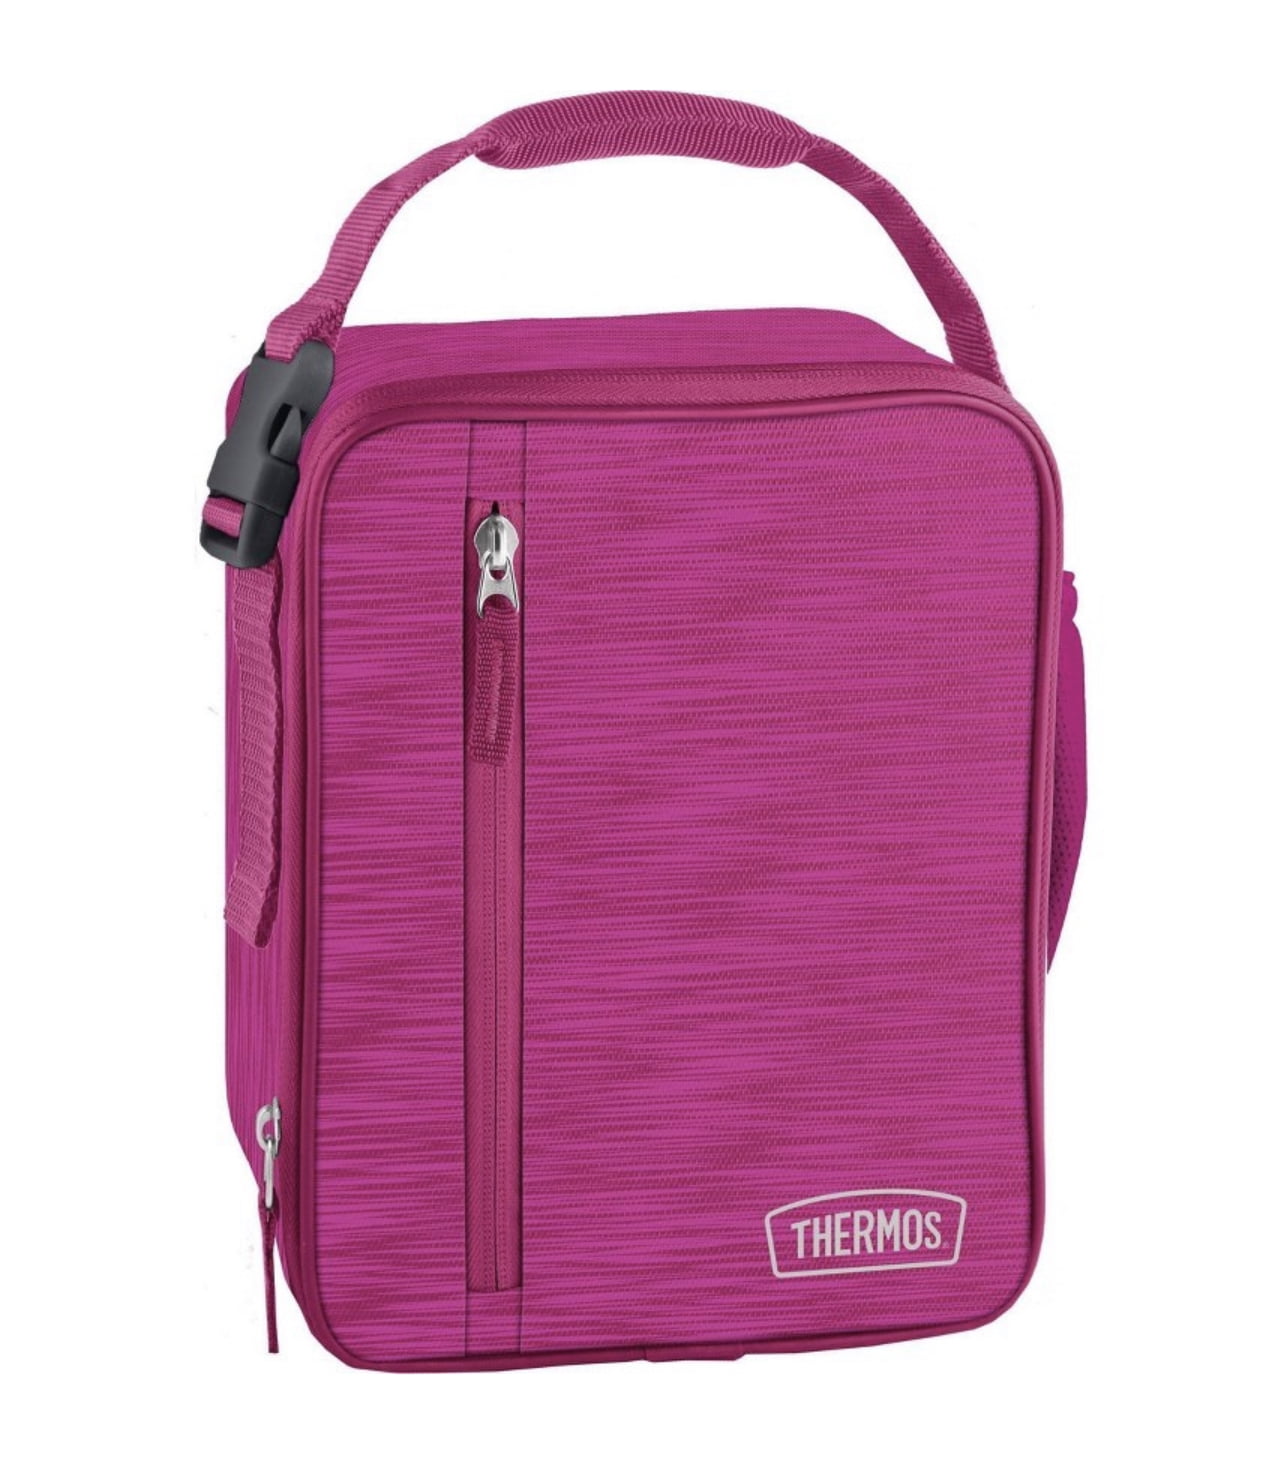 Thermos Kids' Athleisure Upright Lunch Bag - Red